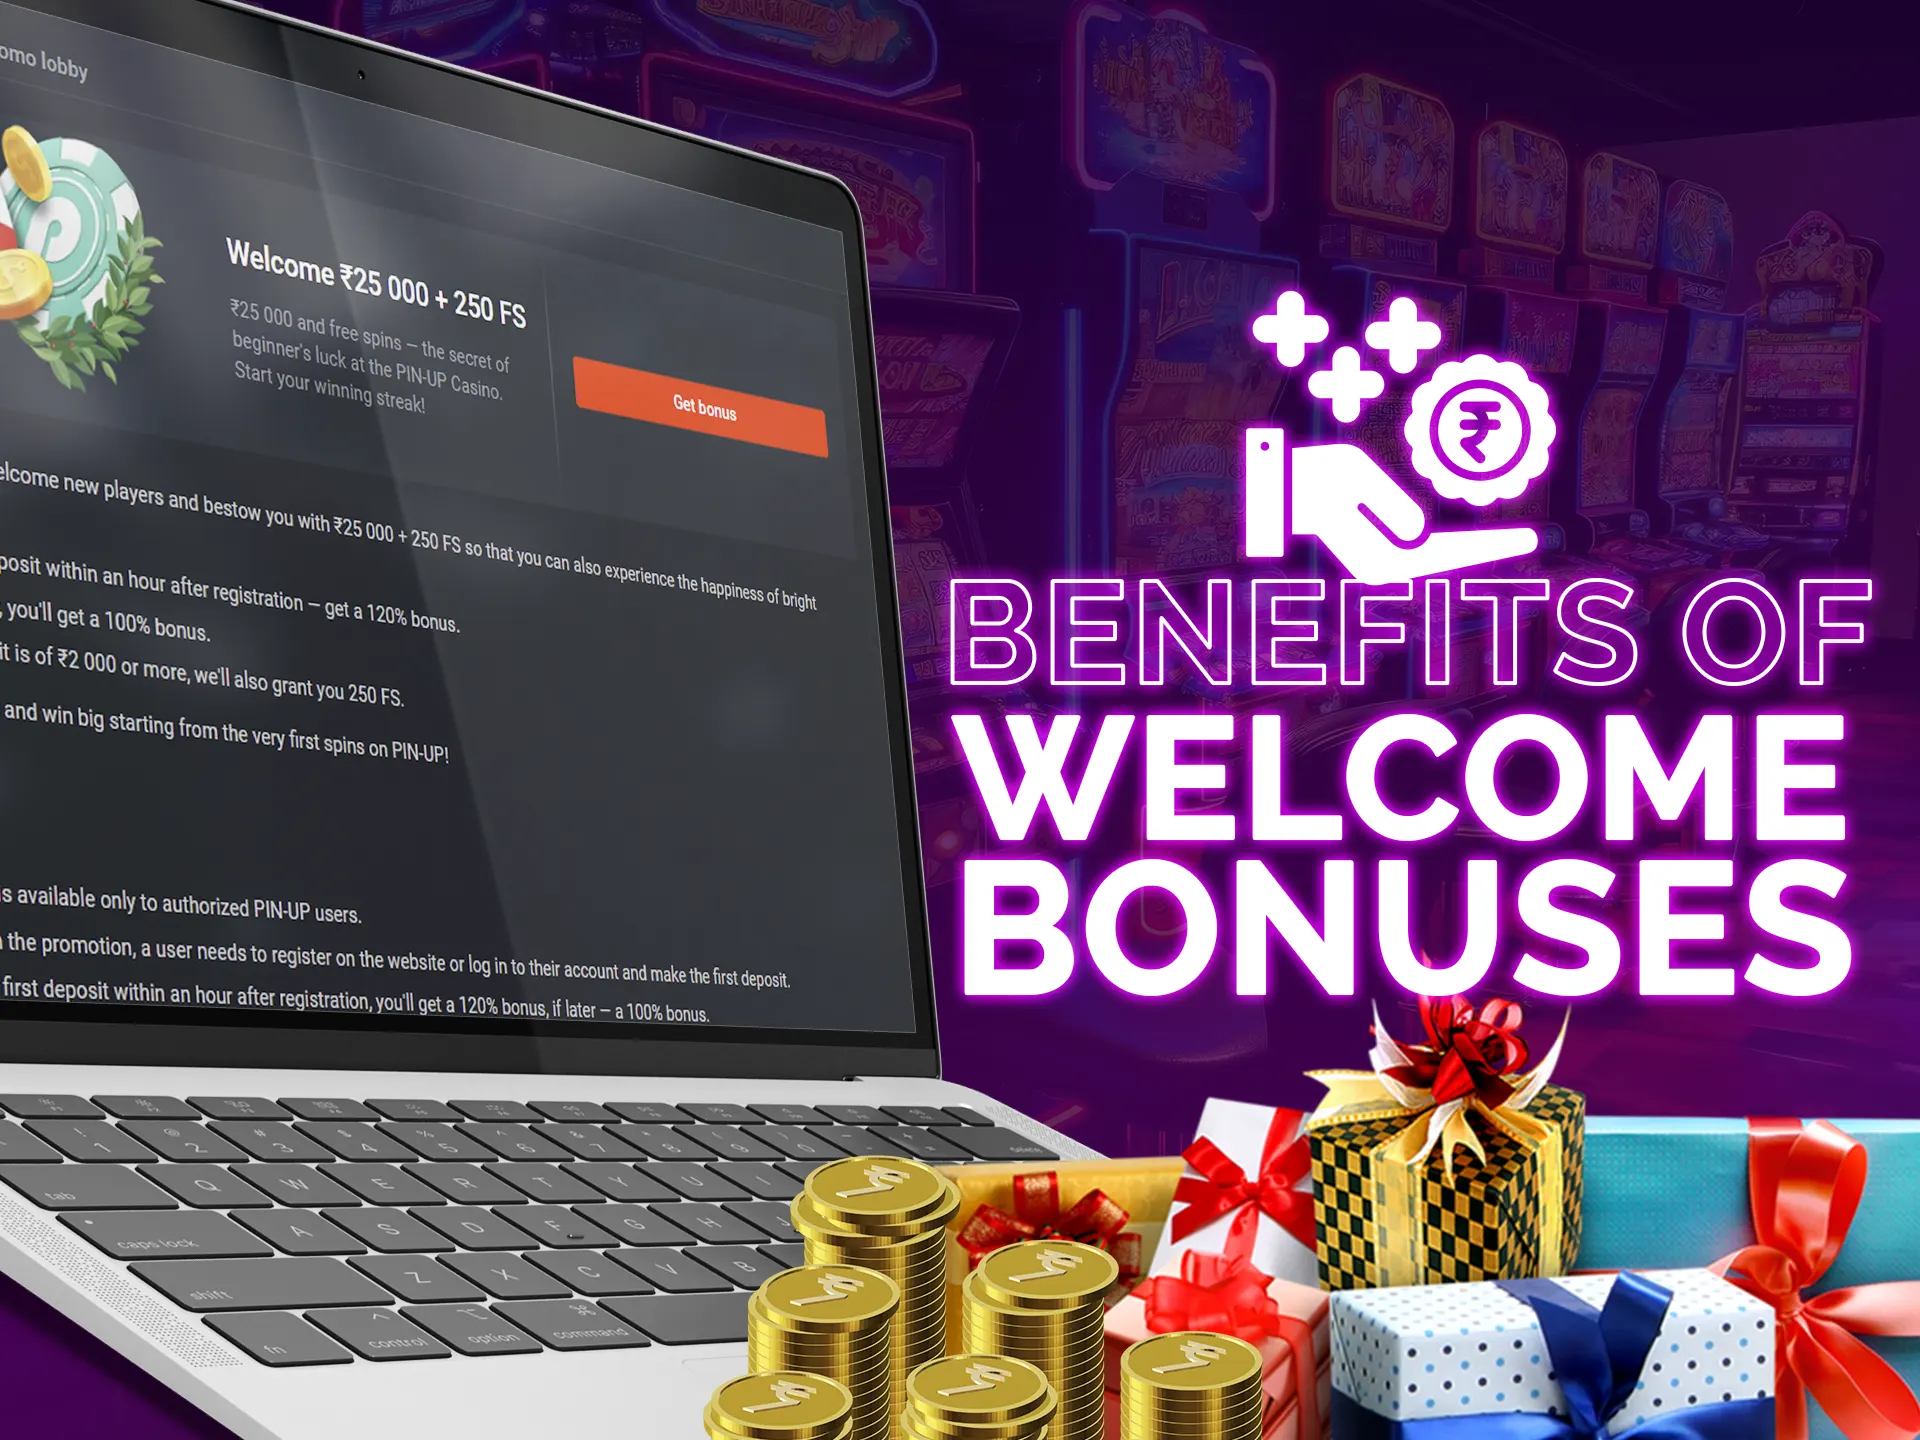 Here the list of the benefits of welcome bonuses.